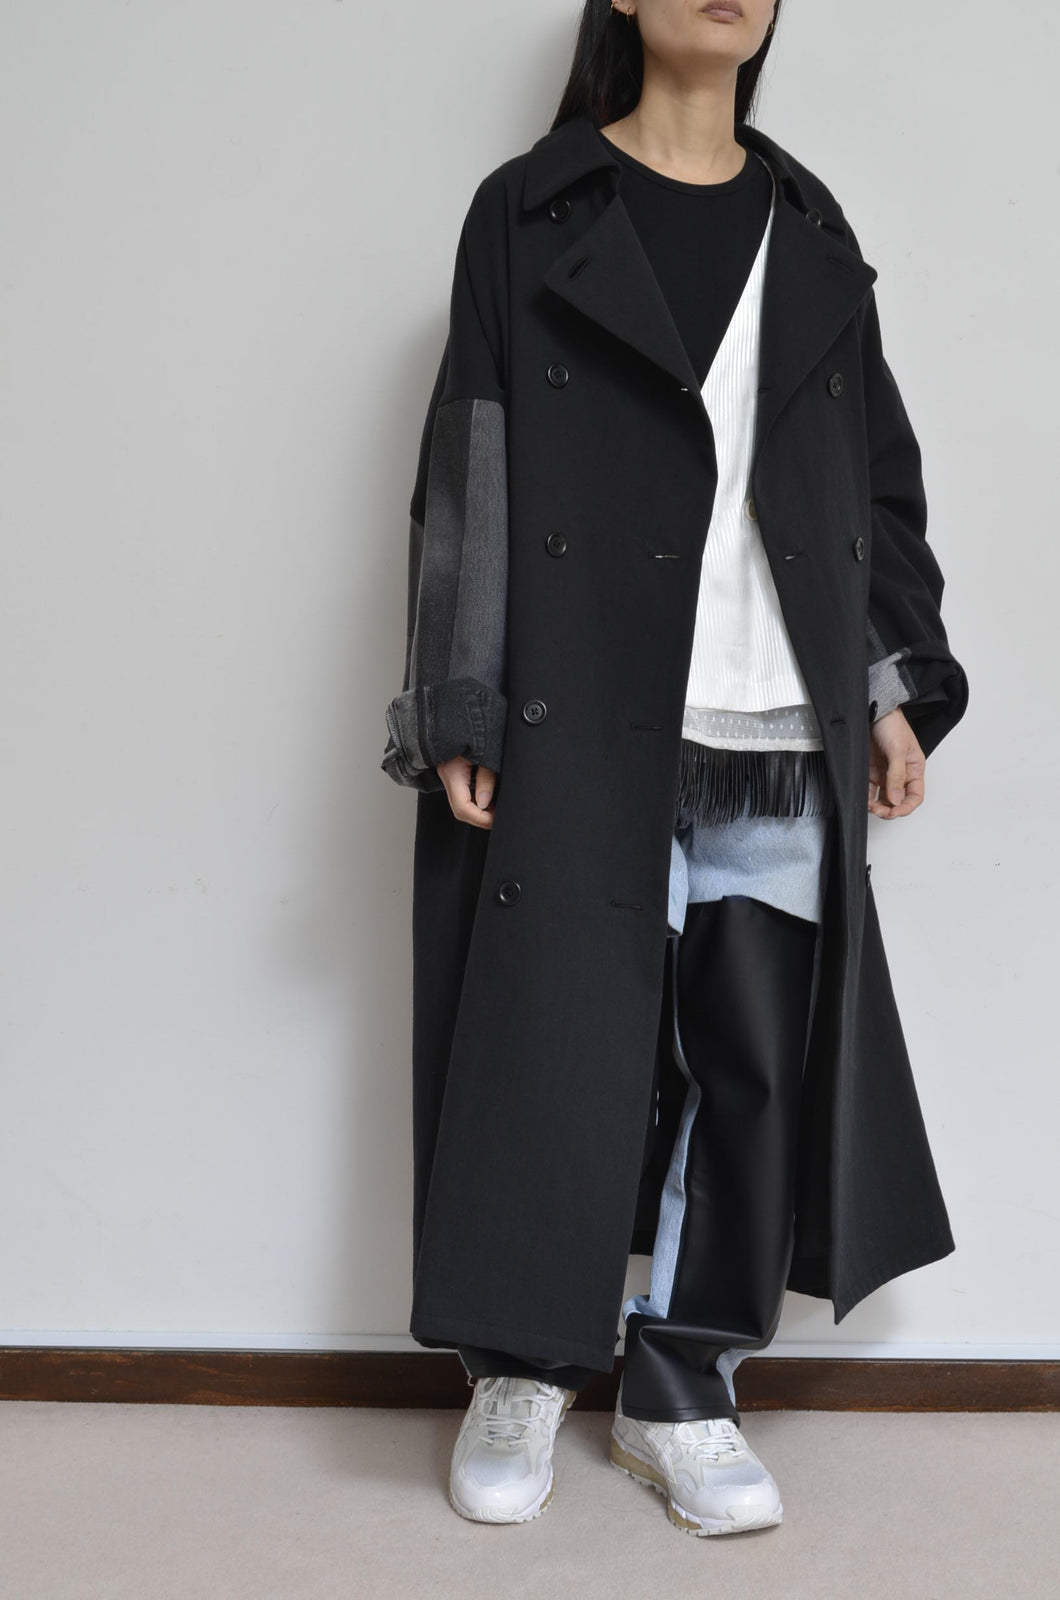 [your right things 代官山 蔦屋書店出品中]DENIM SLEEVE TRENCH COAT/BLK/02